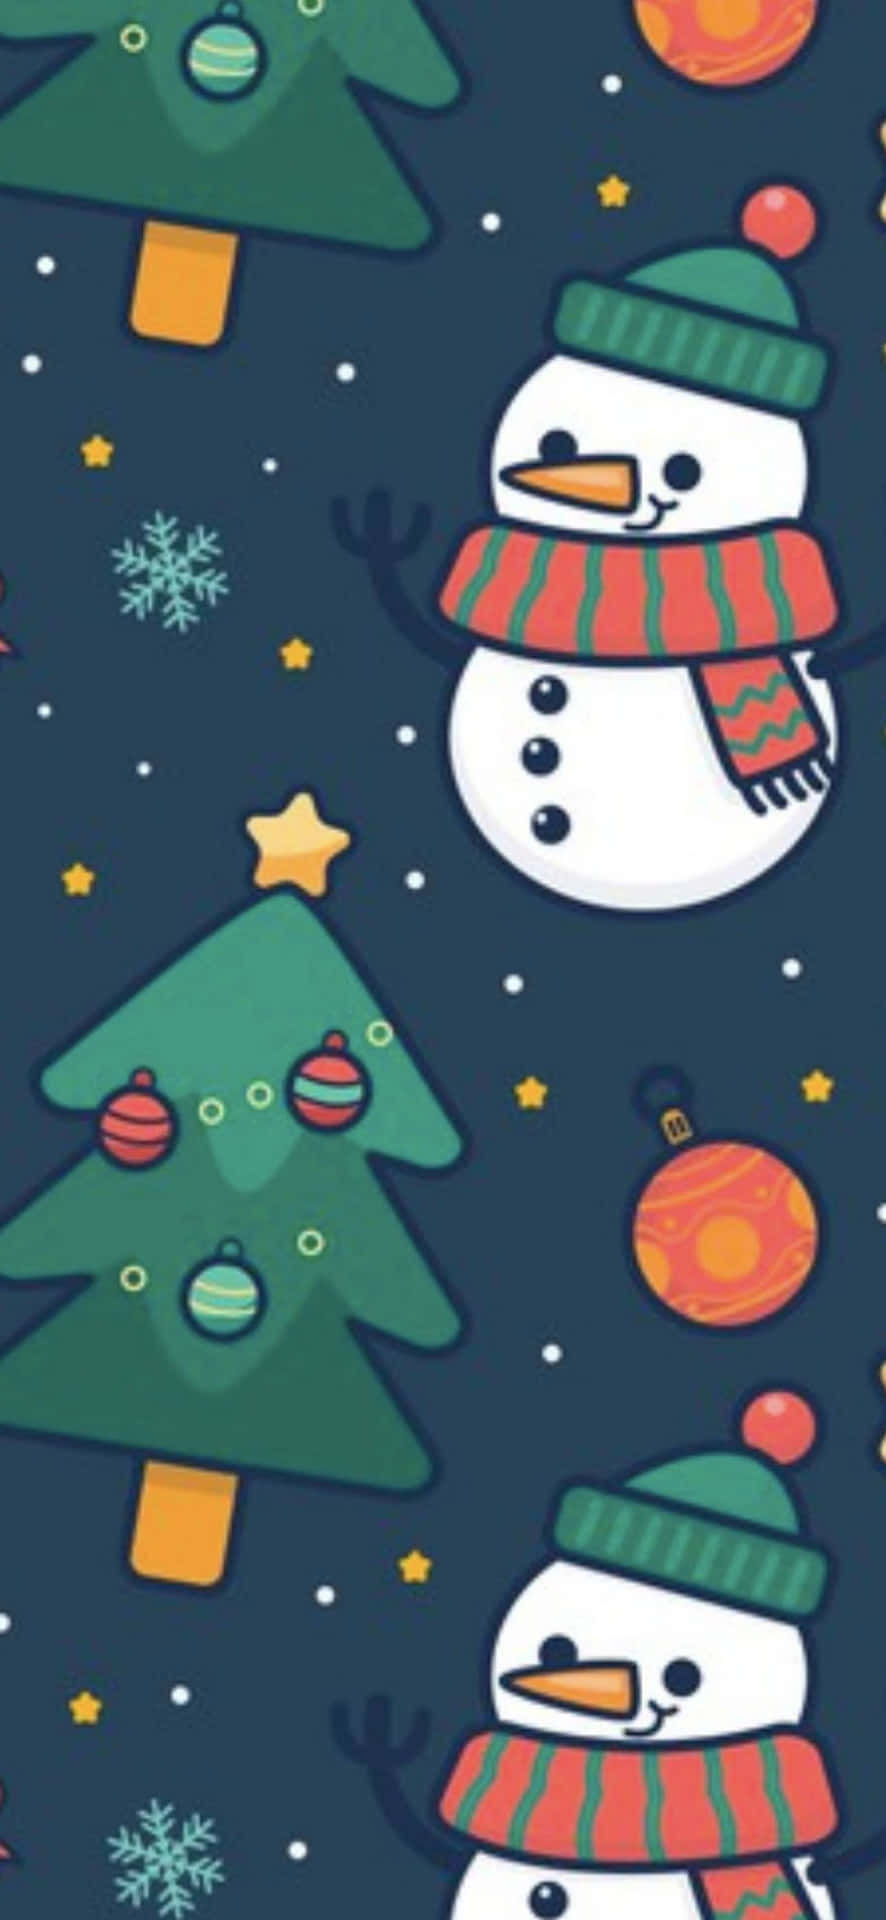 Have yourself a Merry Little Christmas on your Iphone